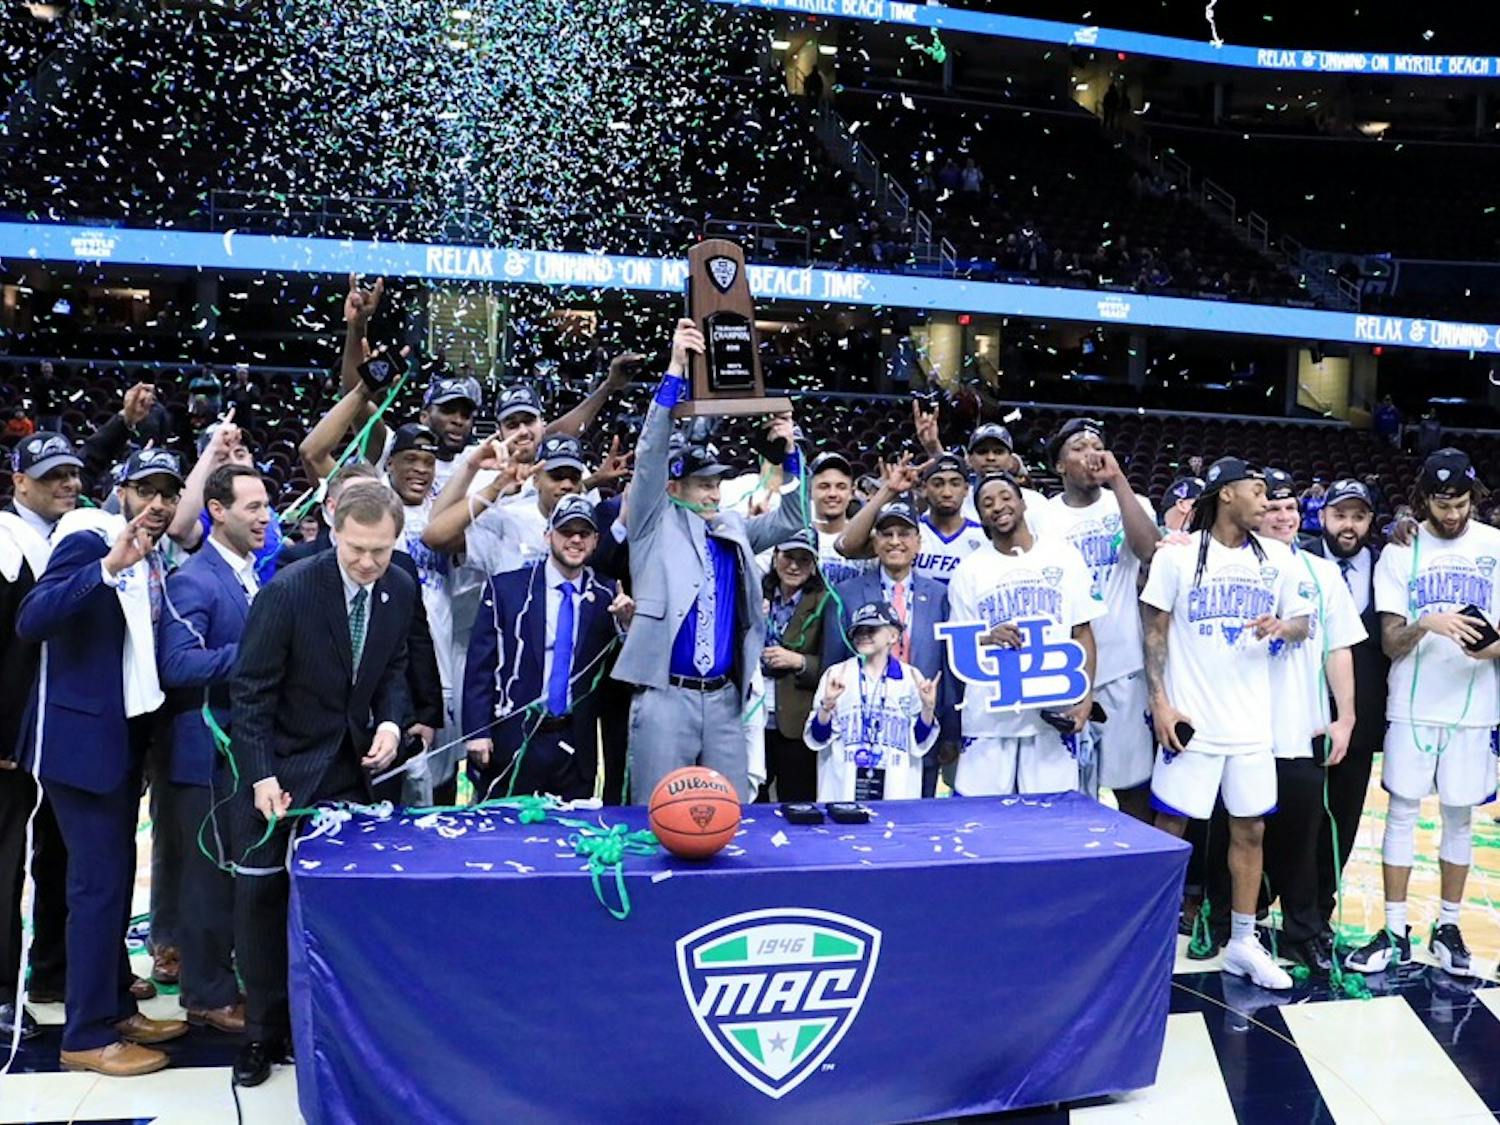 Bulls head coach Nate Oats lifts the MAC tournament trophy over his head. The Bulls have won three of the last four MAC tournaments and are both the MAC regular season and MAC tournament champions this year.